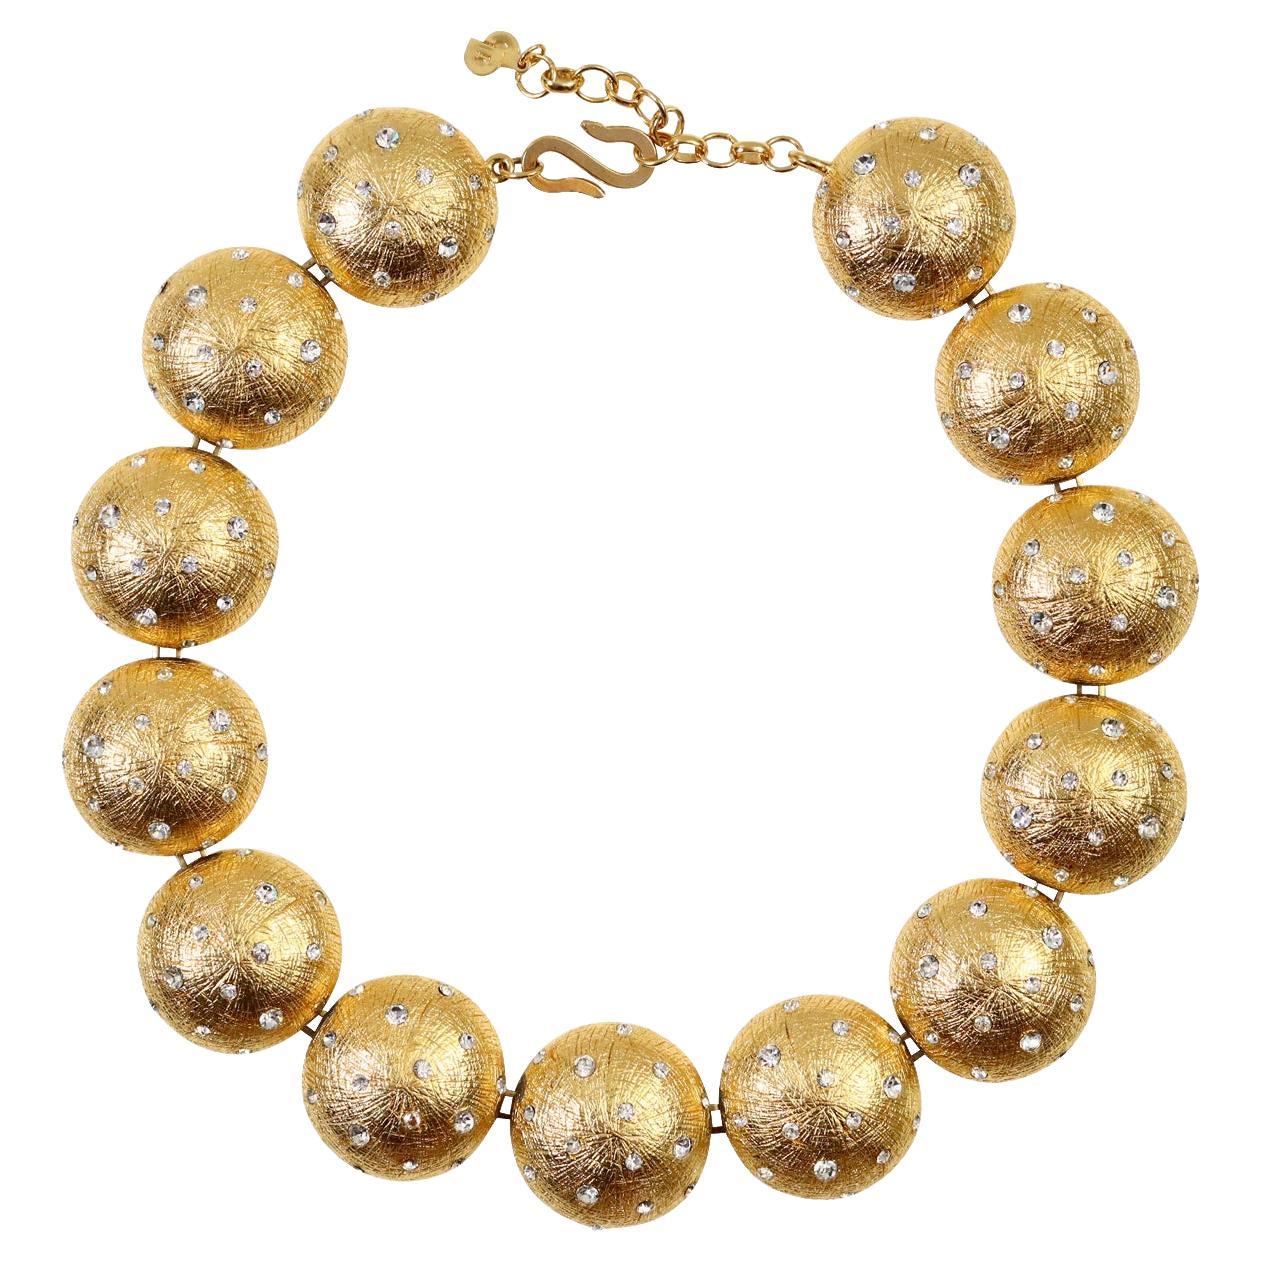 Vintage Christian Dior Gold Disc Necklace with Crystals Circa 1980s. Classic Dior necklace with round disc with texture with inlaid crystals.  Always looks good and elevates your outfit or even with an open dress and just skin.  This is classic and